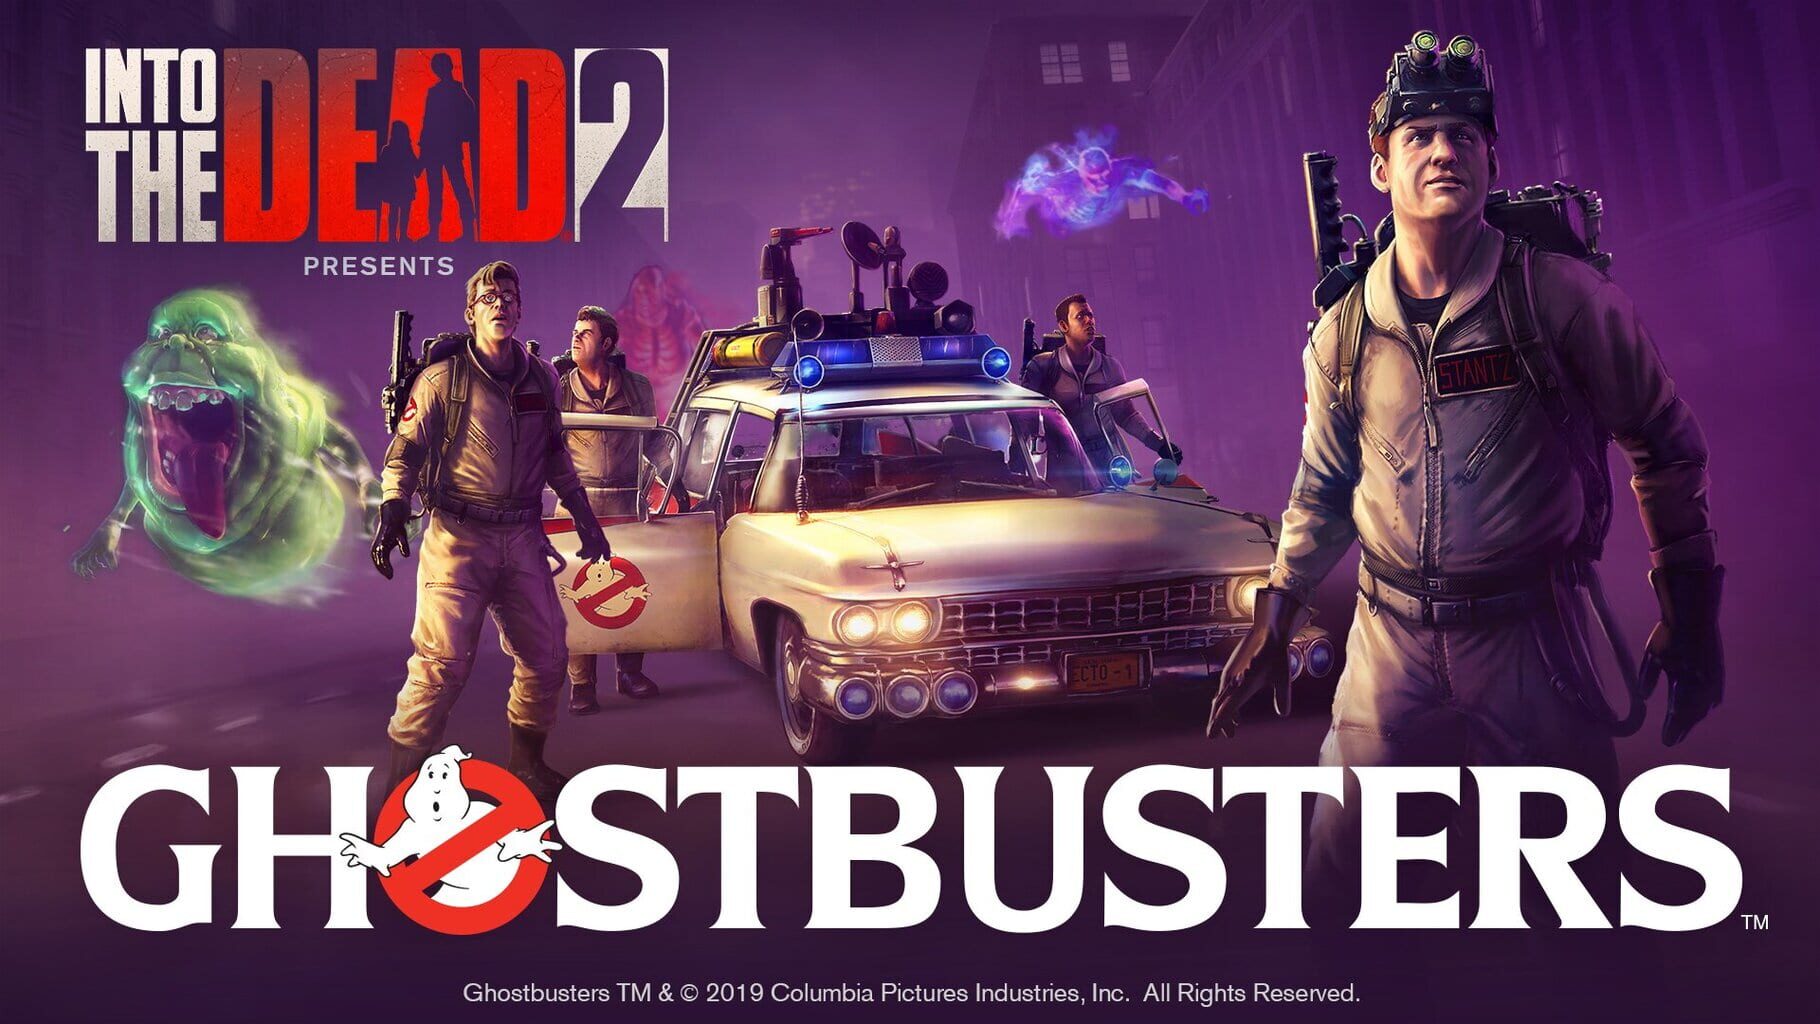 Into the Dead 2: Ghostbusters artwork